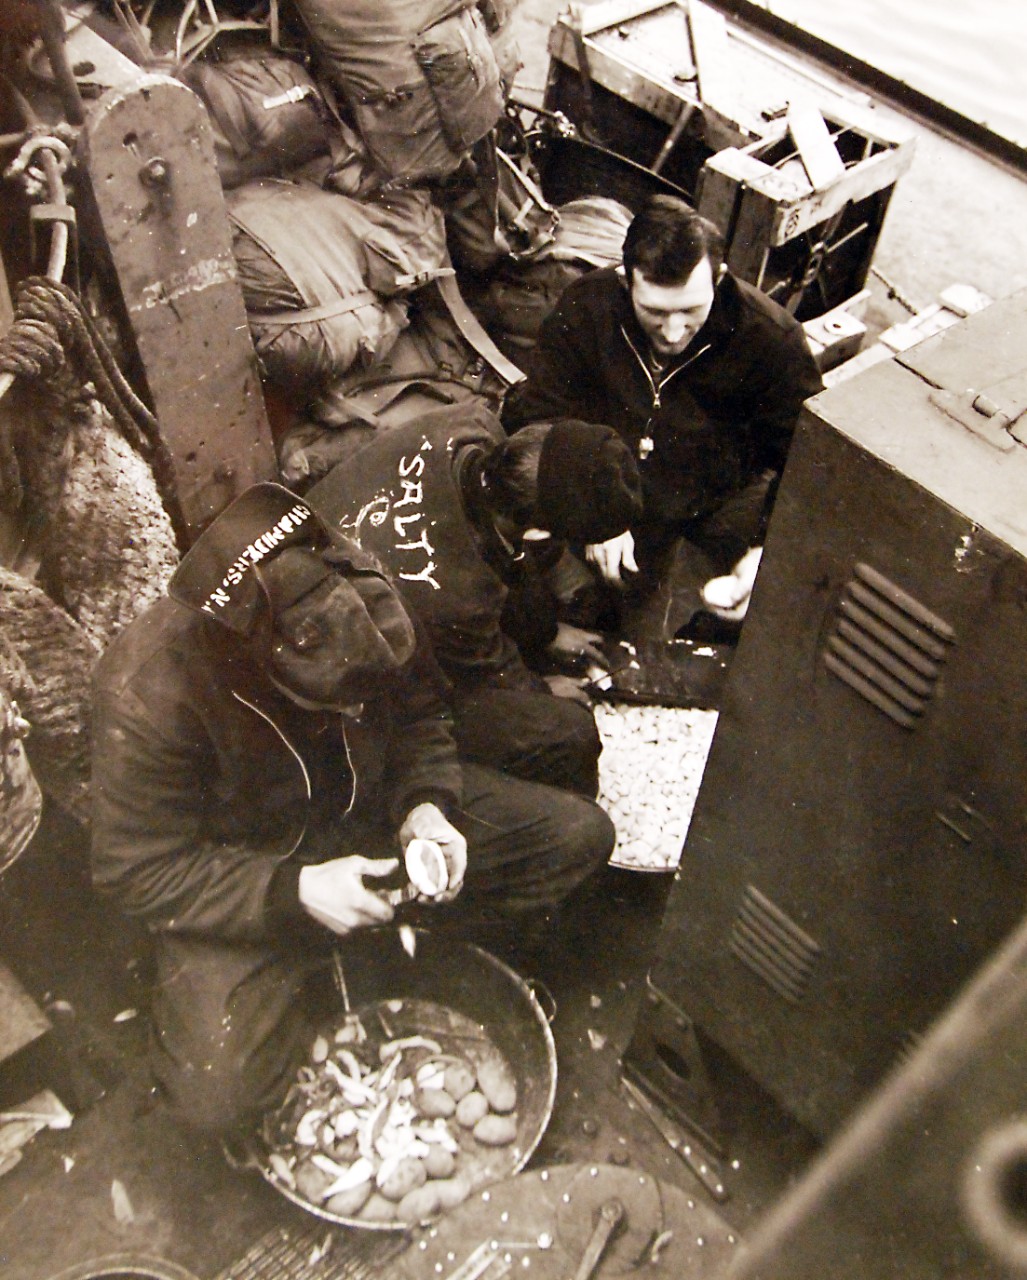 80-G-51004:    Aleutian Islands Campaign, June 1942 - August 1943. Battle for Attu, May 1943.      Peeling potatoes on board an amphibious craft on way to invade Attu.   U.S. Navy Photograph, now in the collections of the National Archives.  (2016/05/10).